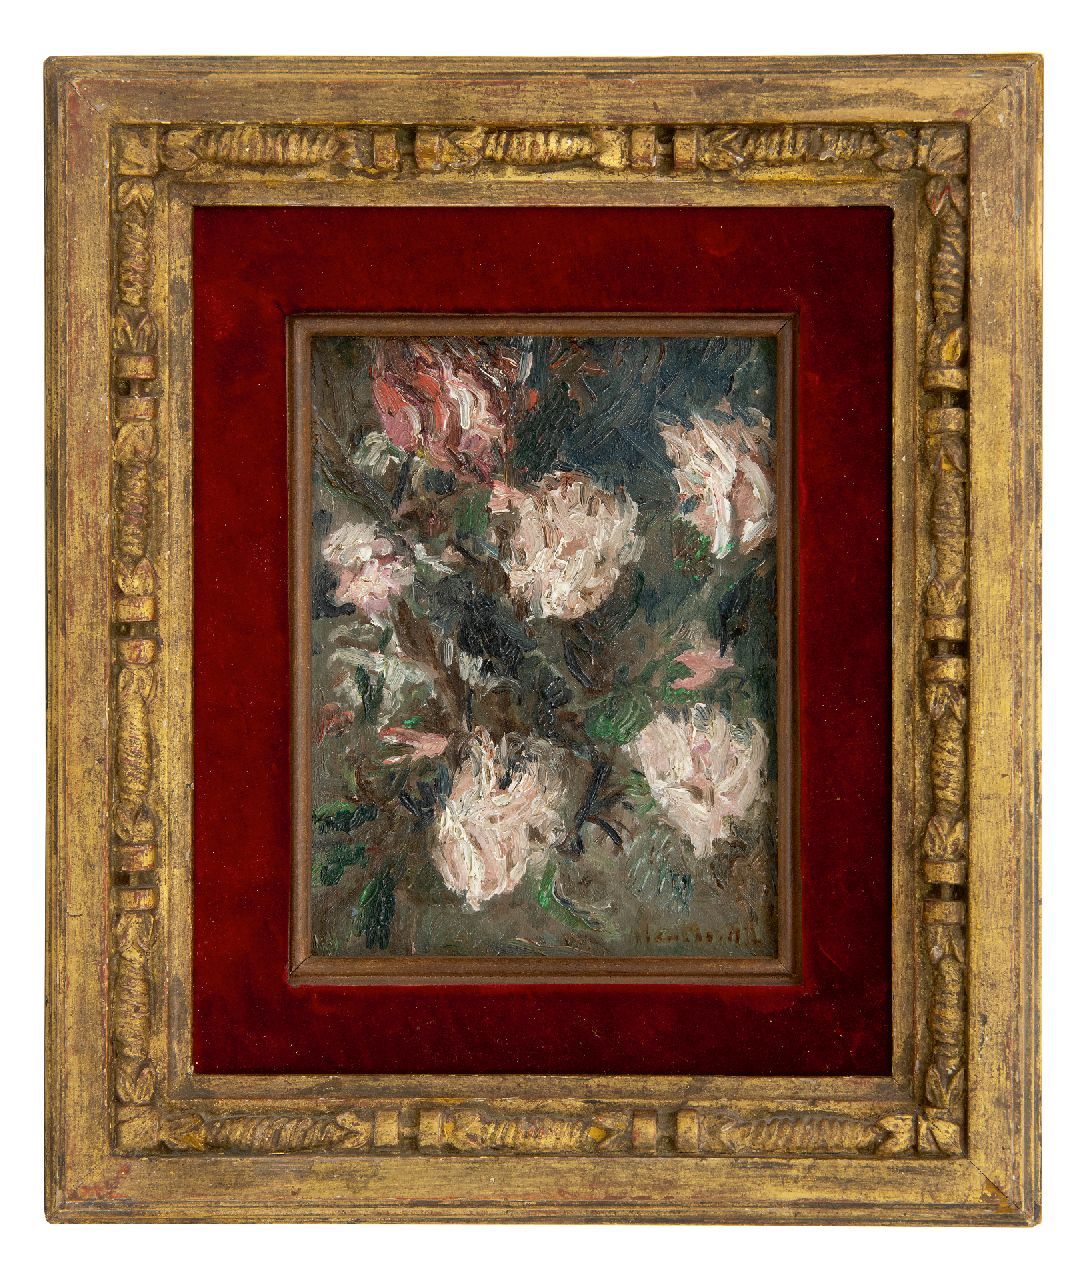 Monticelli A.J.T.  | 'Adolphe' Joseph Thomas Monticelli Monticelli | Paintings offered for sale | Roses, oil on canvas 21.3 x 16.1 cm, signed l.r.